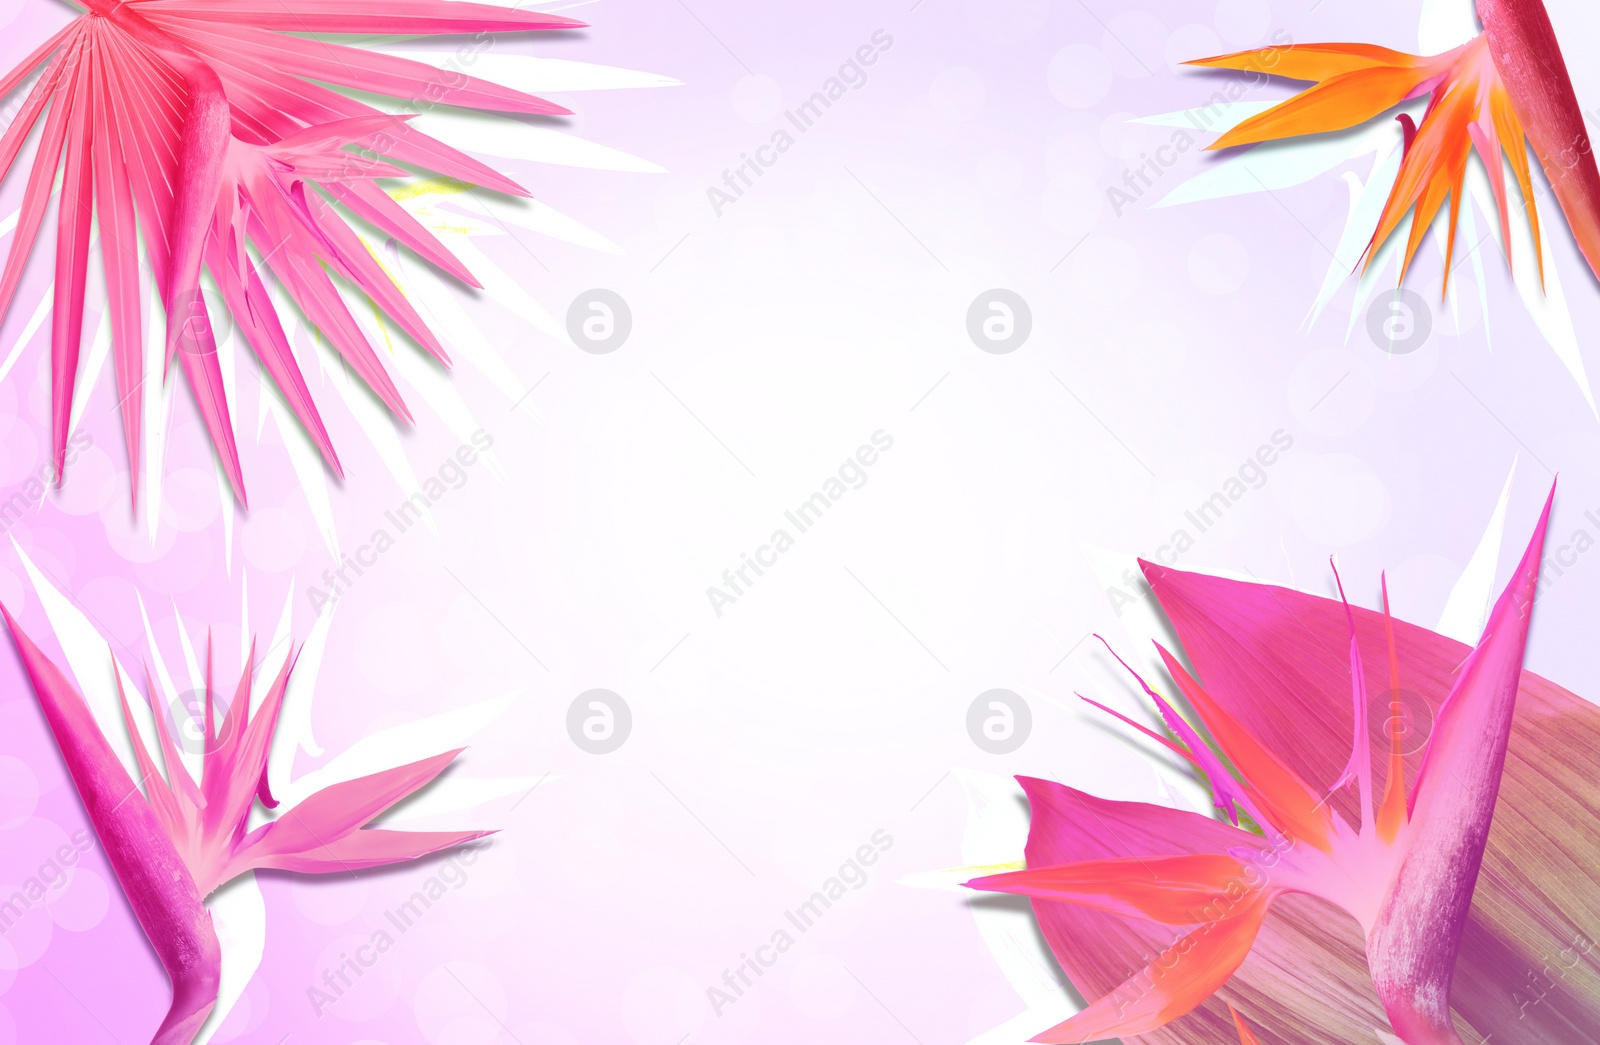 Image of Colorful tropical plants on light background, flat lay. Creative design